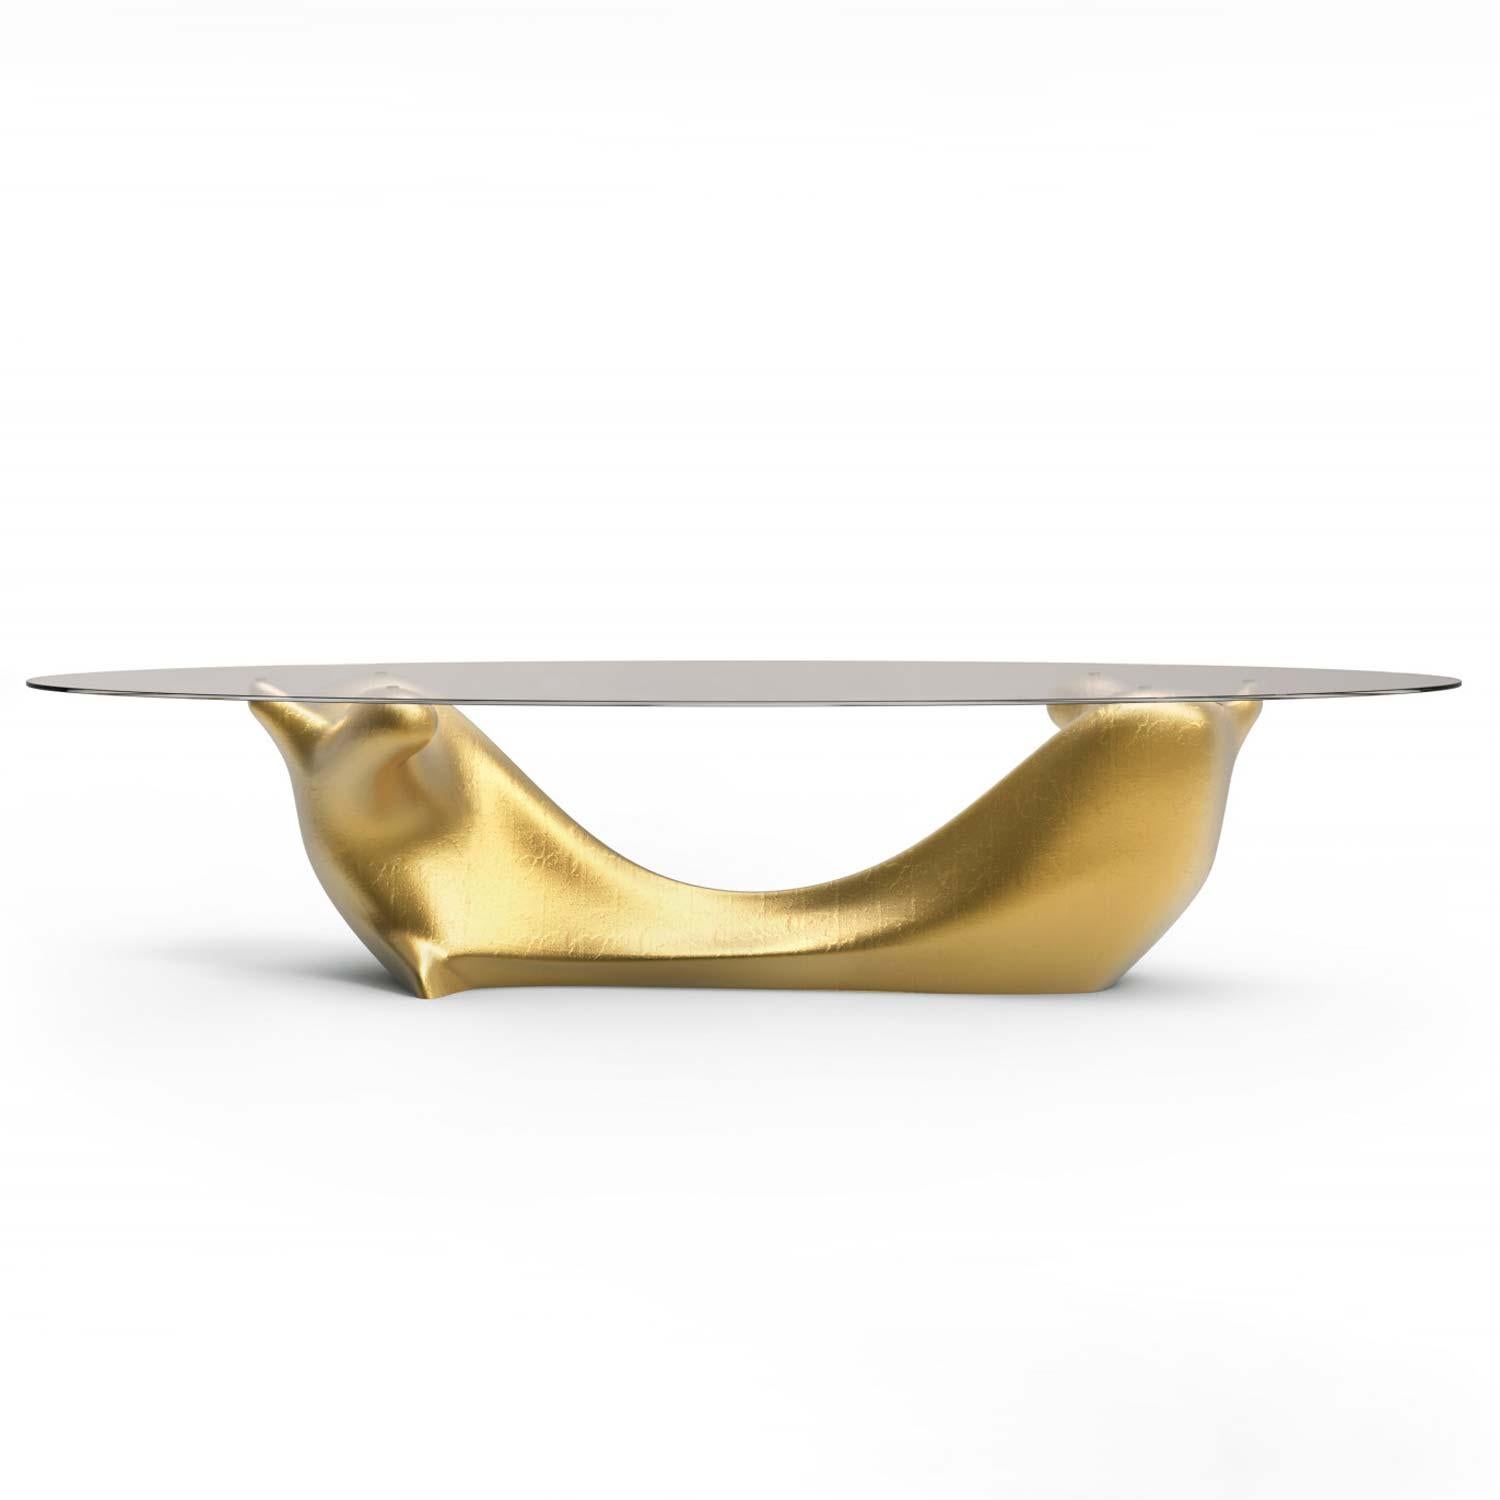 Contemporary Biomorphic Sculptural Dining Table In Gold Leaf For Sale